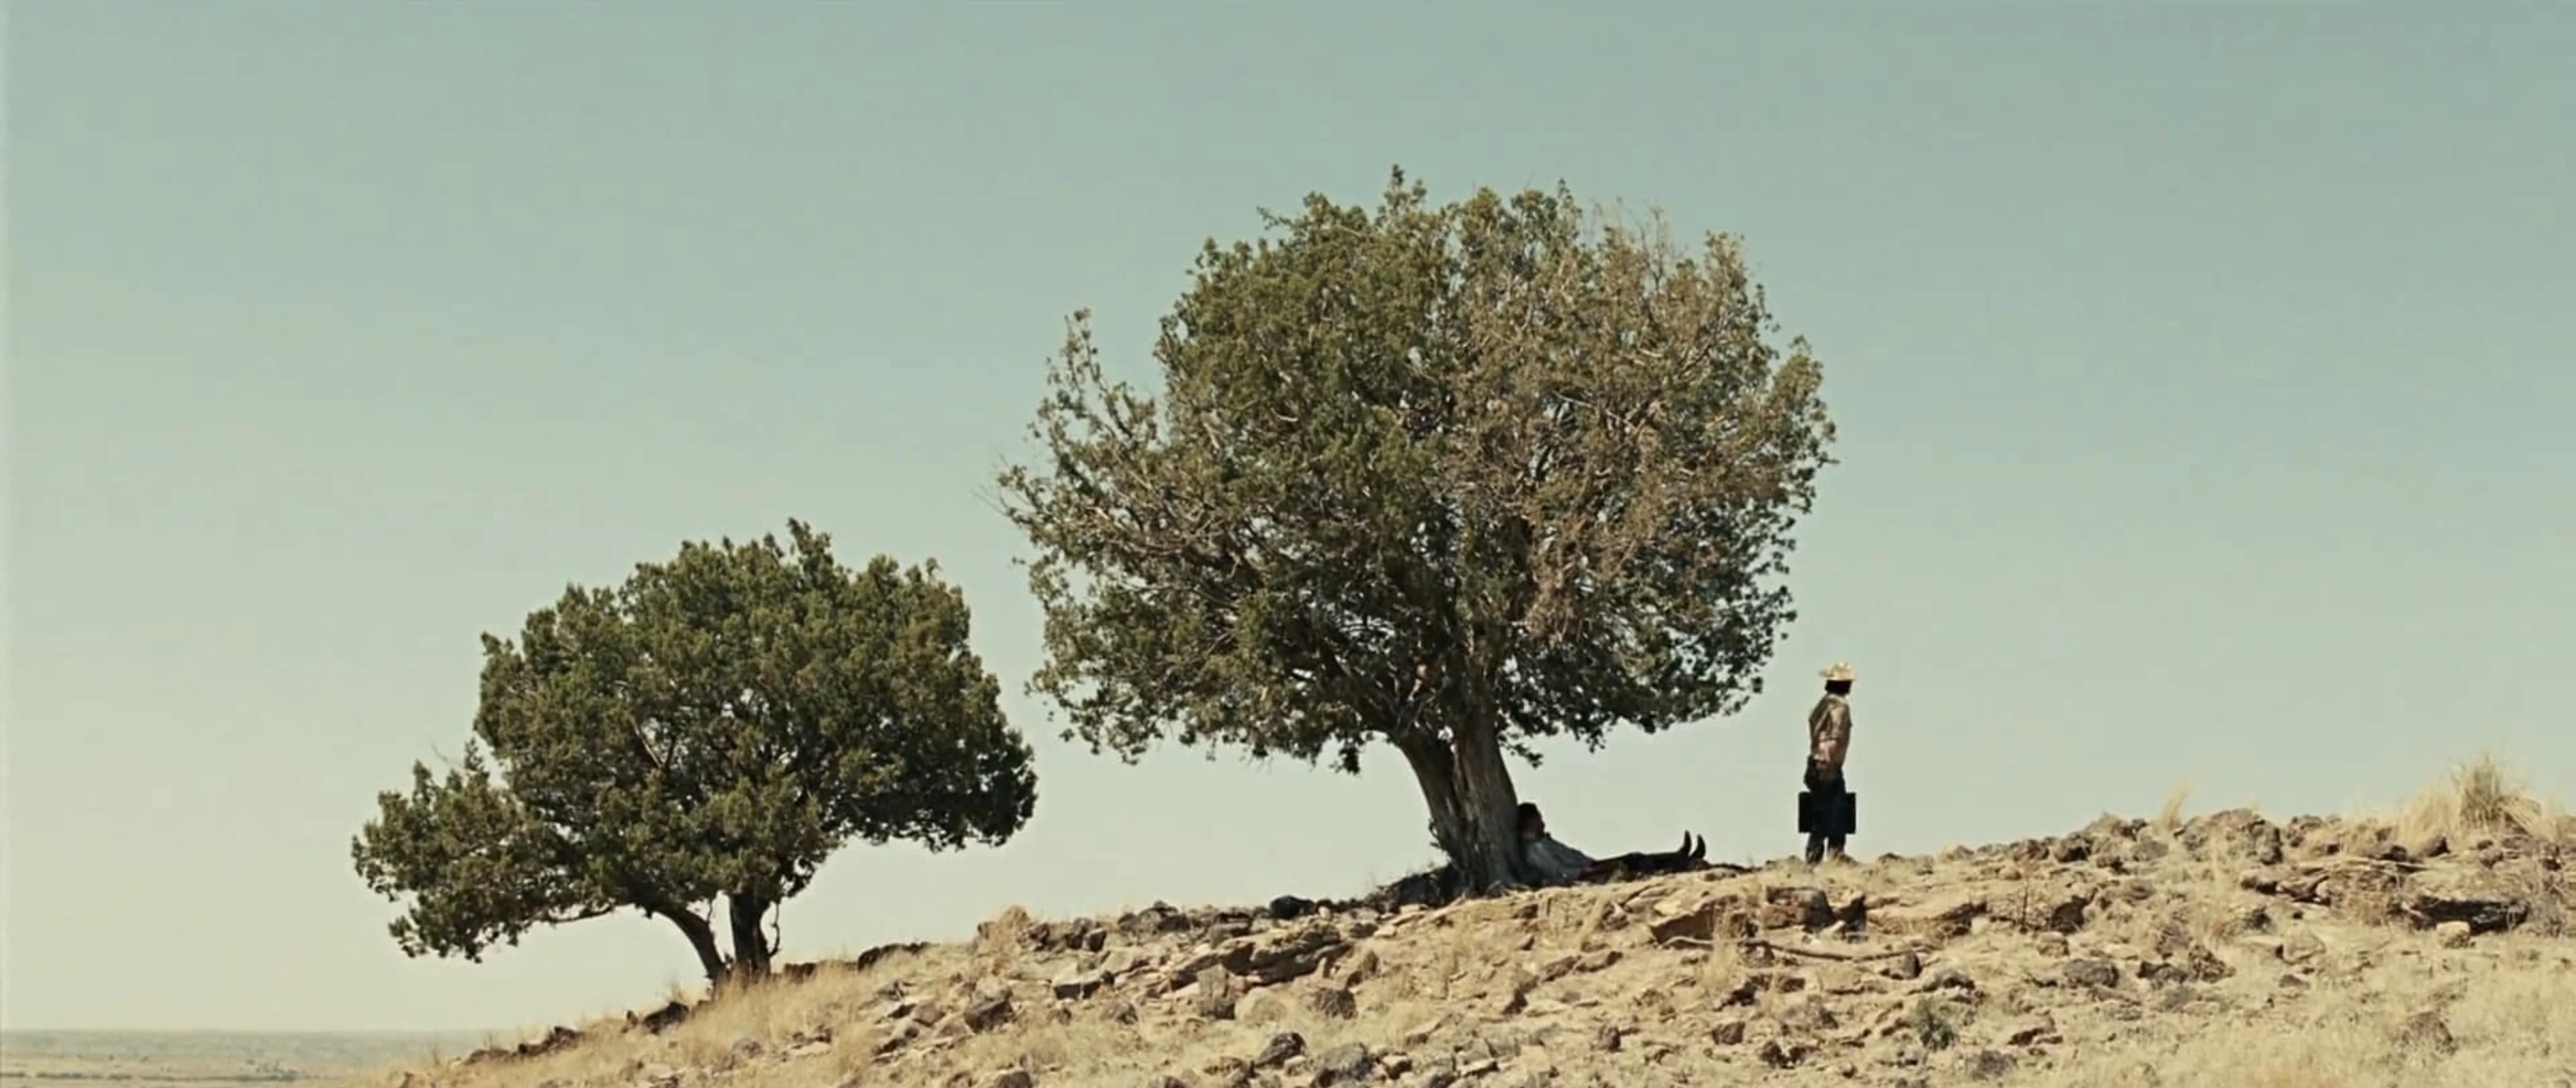 NO COUNTRY FOR OLD MEN on Vimeo